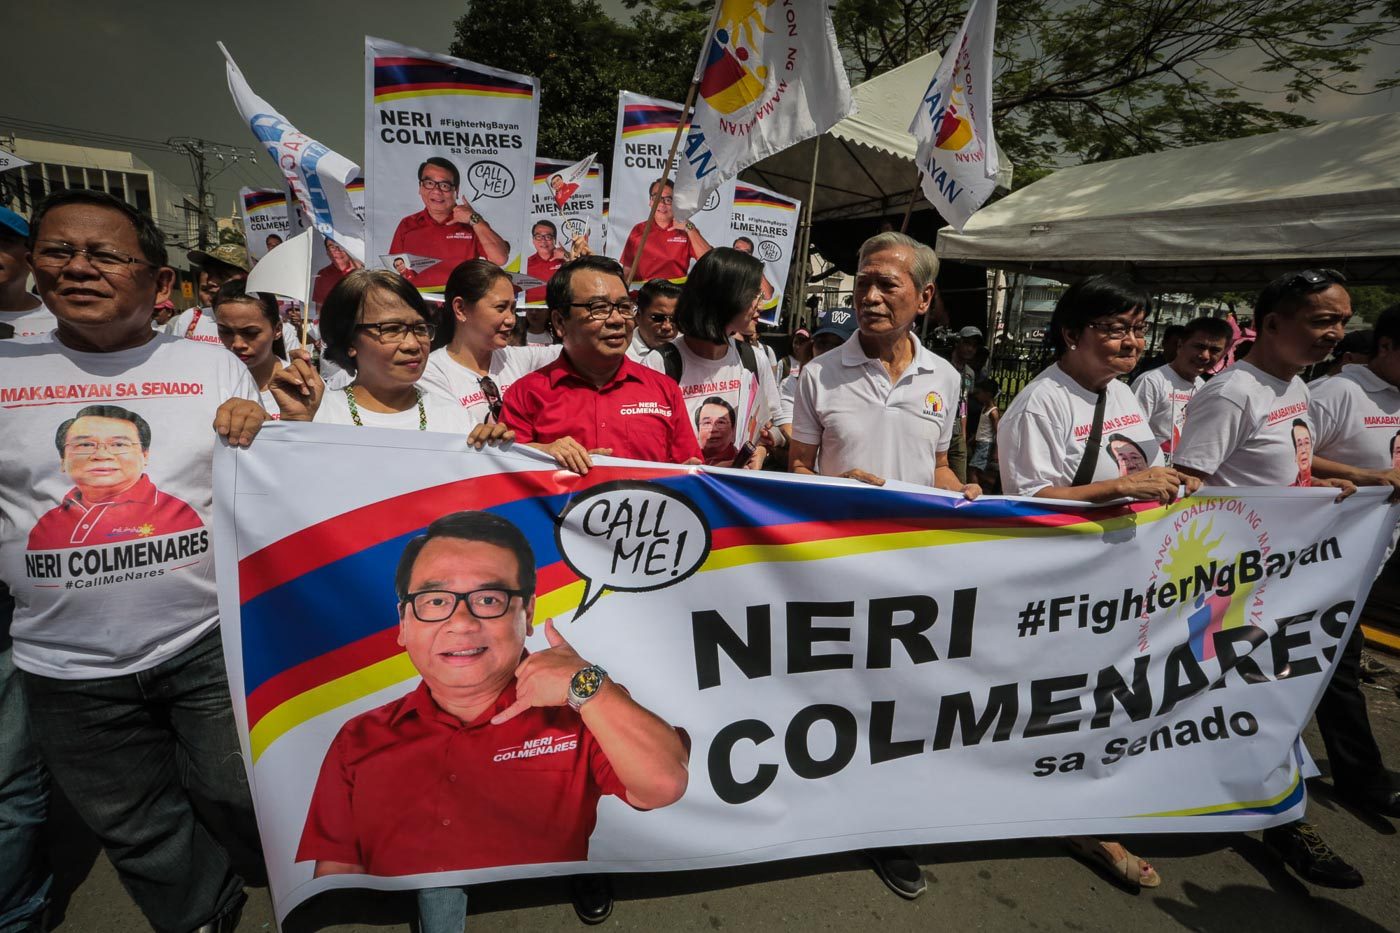 SECOND TRY. Supporters of Neri Colminares gather outside the Comelec office in Manila during the filing of Certificates of Candidacy on October 11, 2018. Photo by Jire Carreon/Rappler 